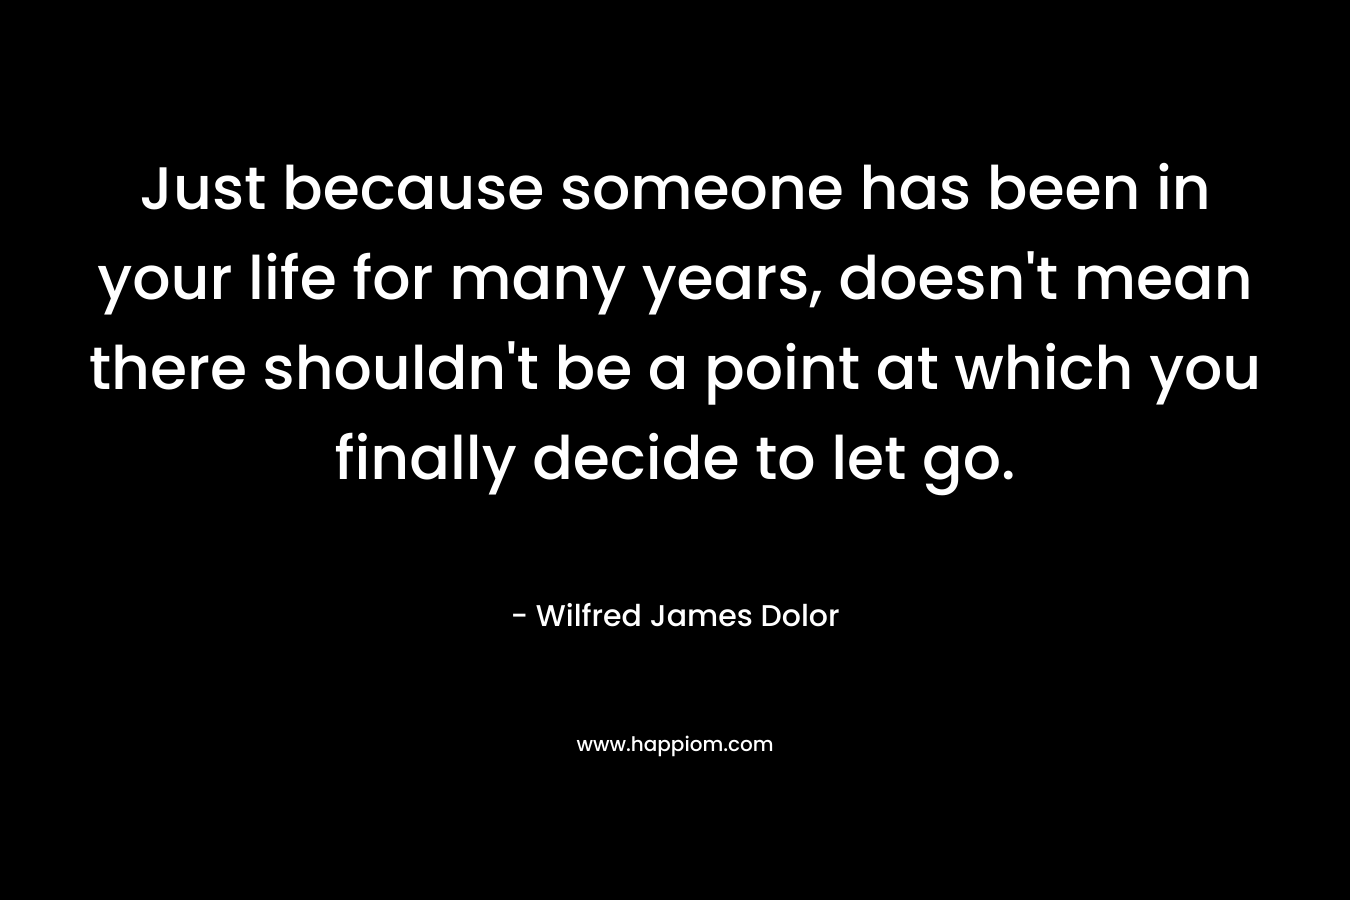 Just because someone has been in your life for many years, doesn't mean there shouldn't be a point at which you finally decide to let go.